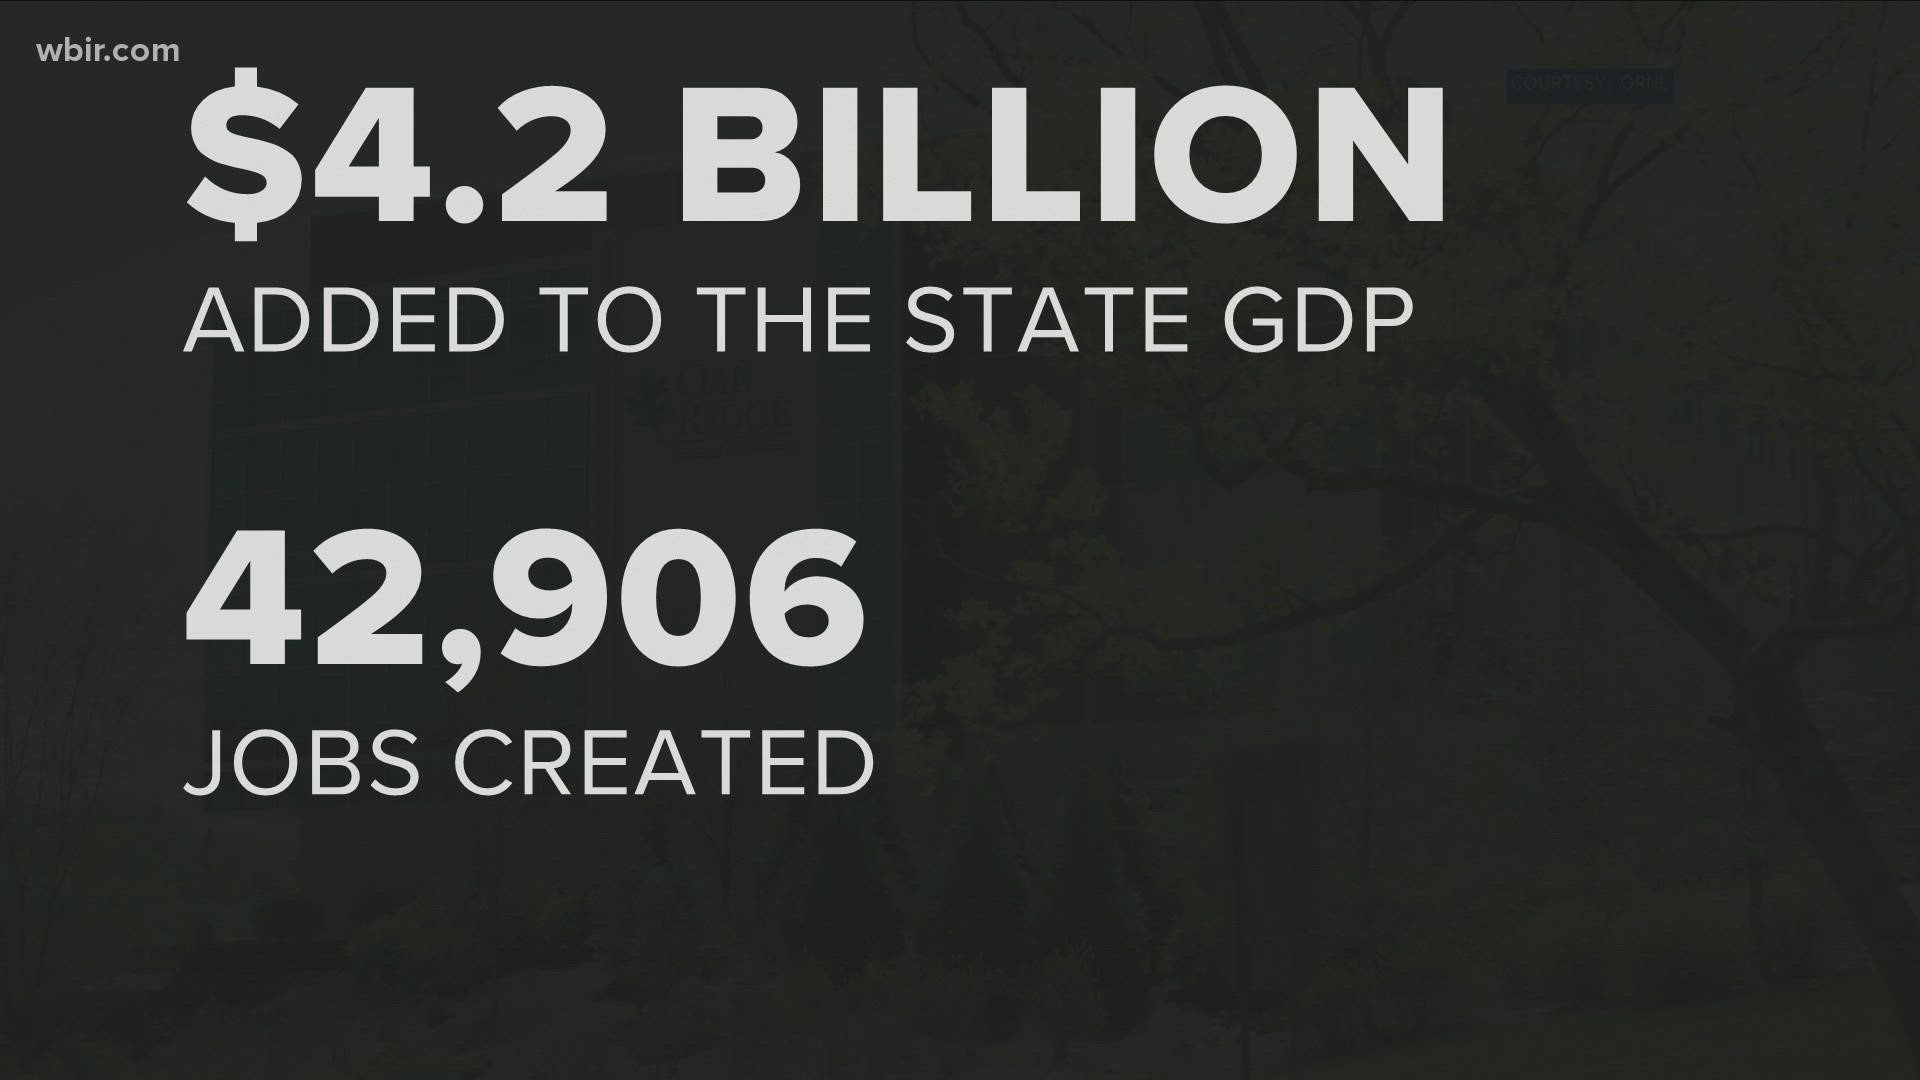 The DOE report that their spending added more than 4 billion dollars to Tennessee's GDP and created more than 40,000 jobs.